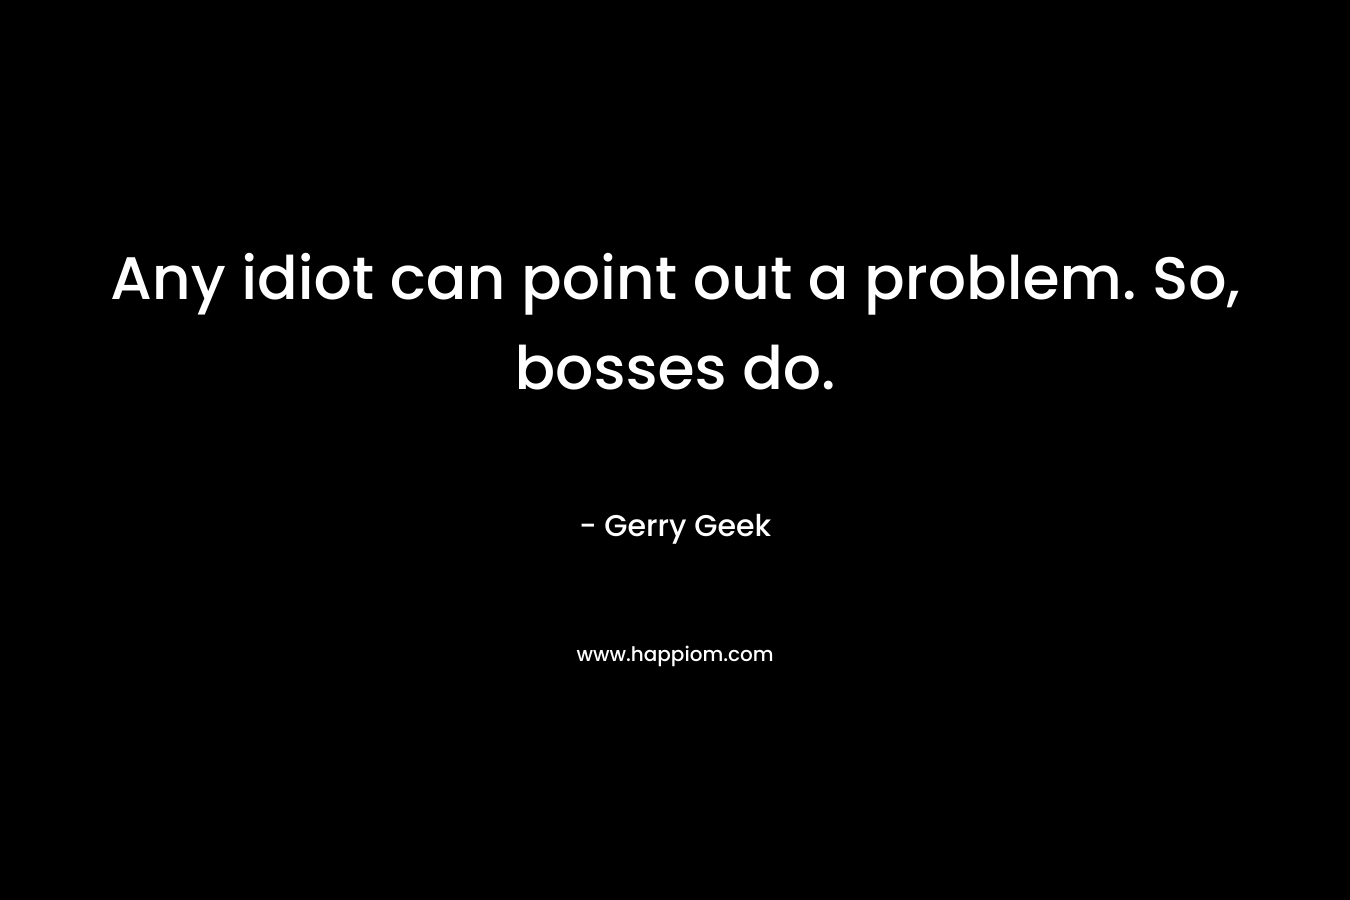 Any idiot can point out a problem. So, bosses do. – Gerry Geek